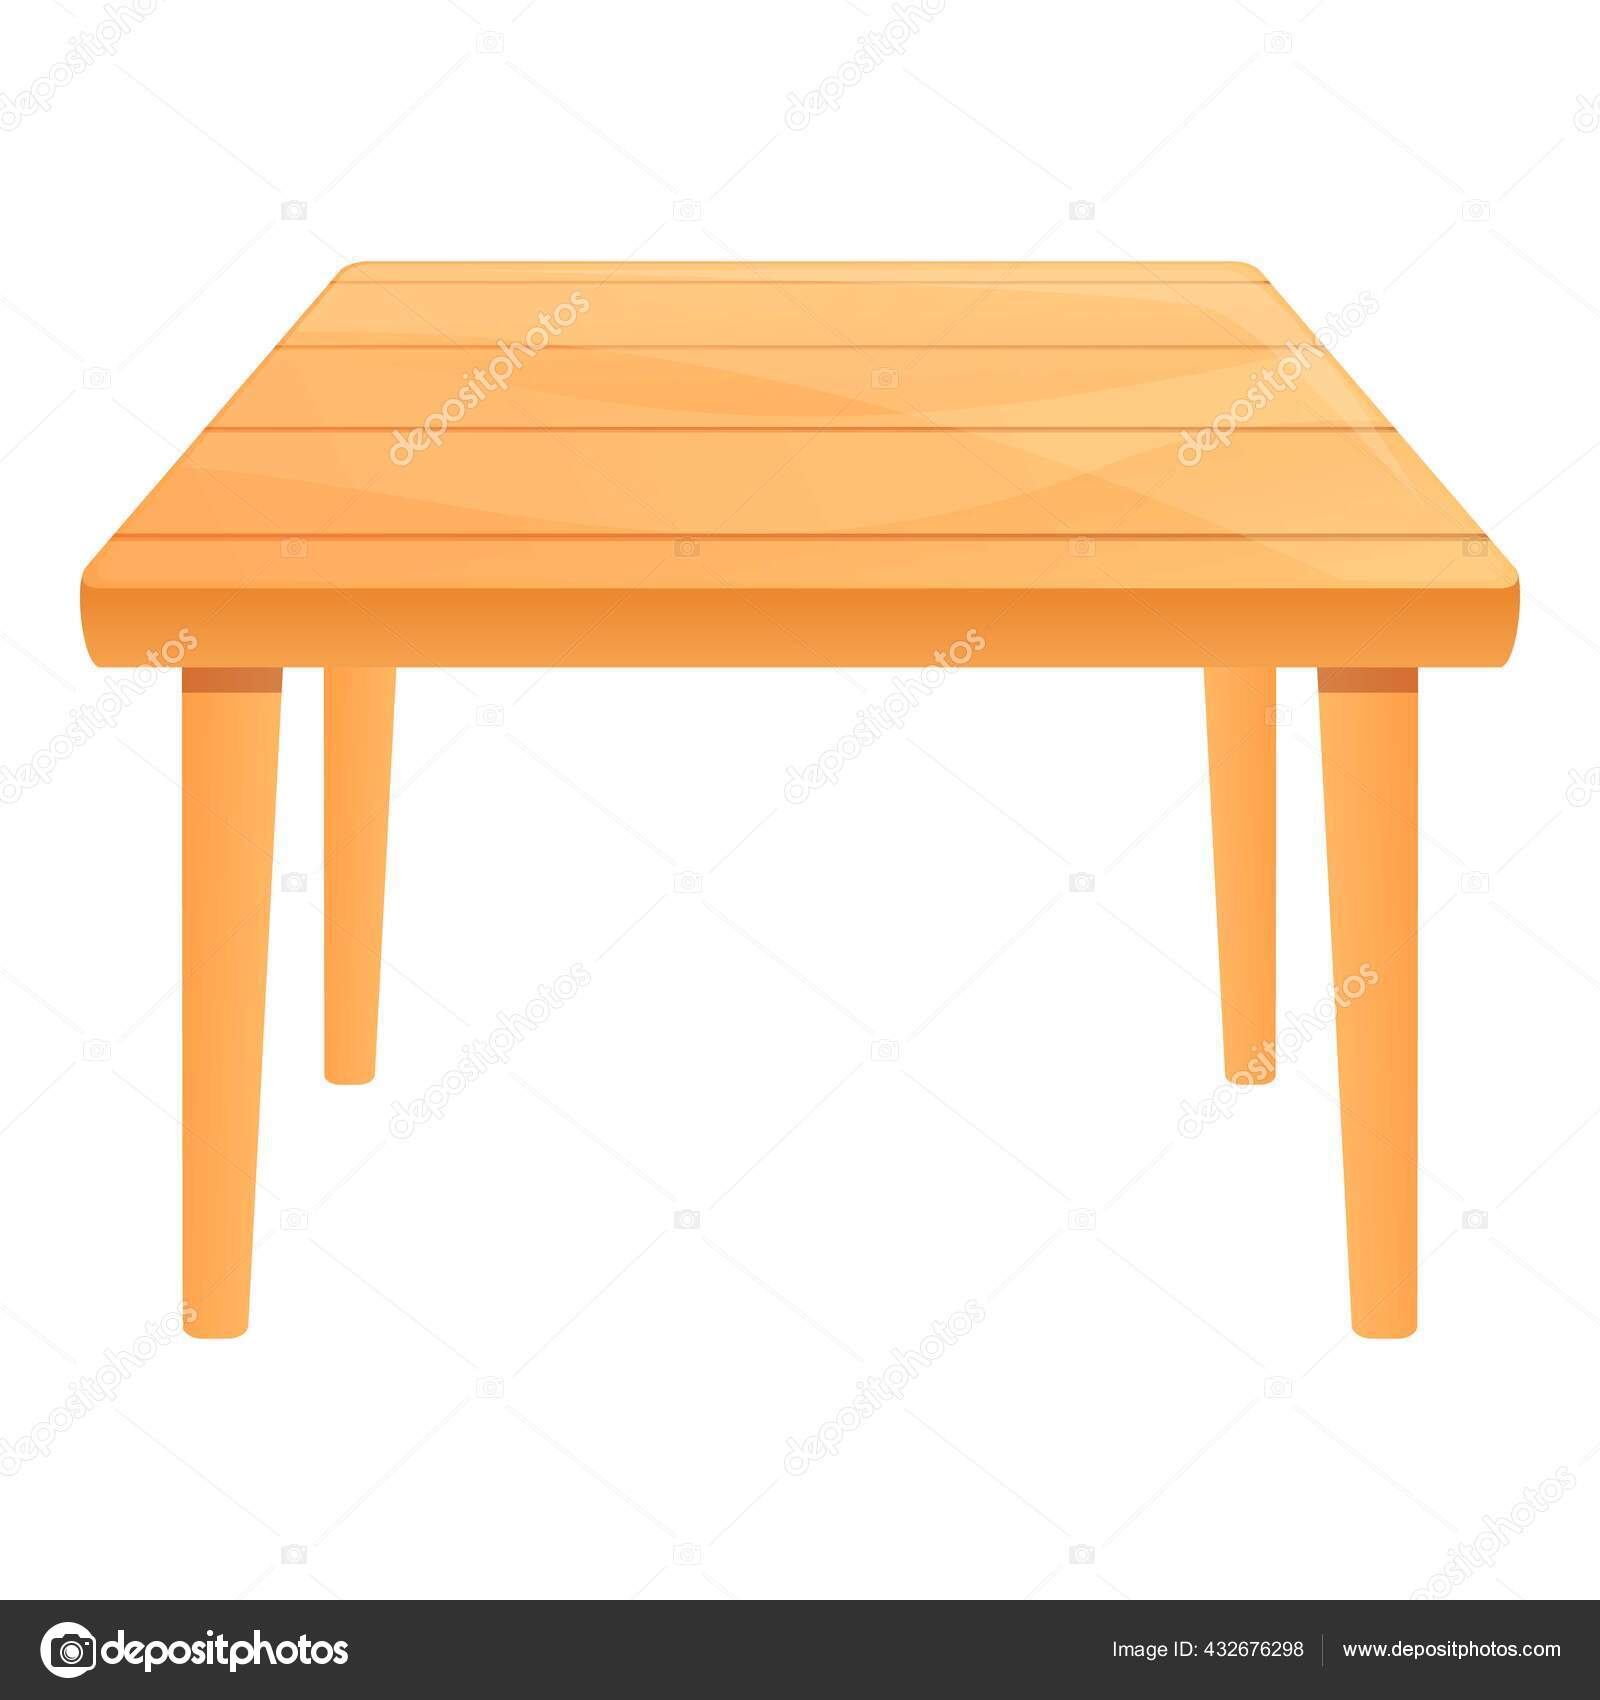 Garden Wood Table Icon Cartoon Style Vector Image By C Nsit0108 Vector Stock